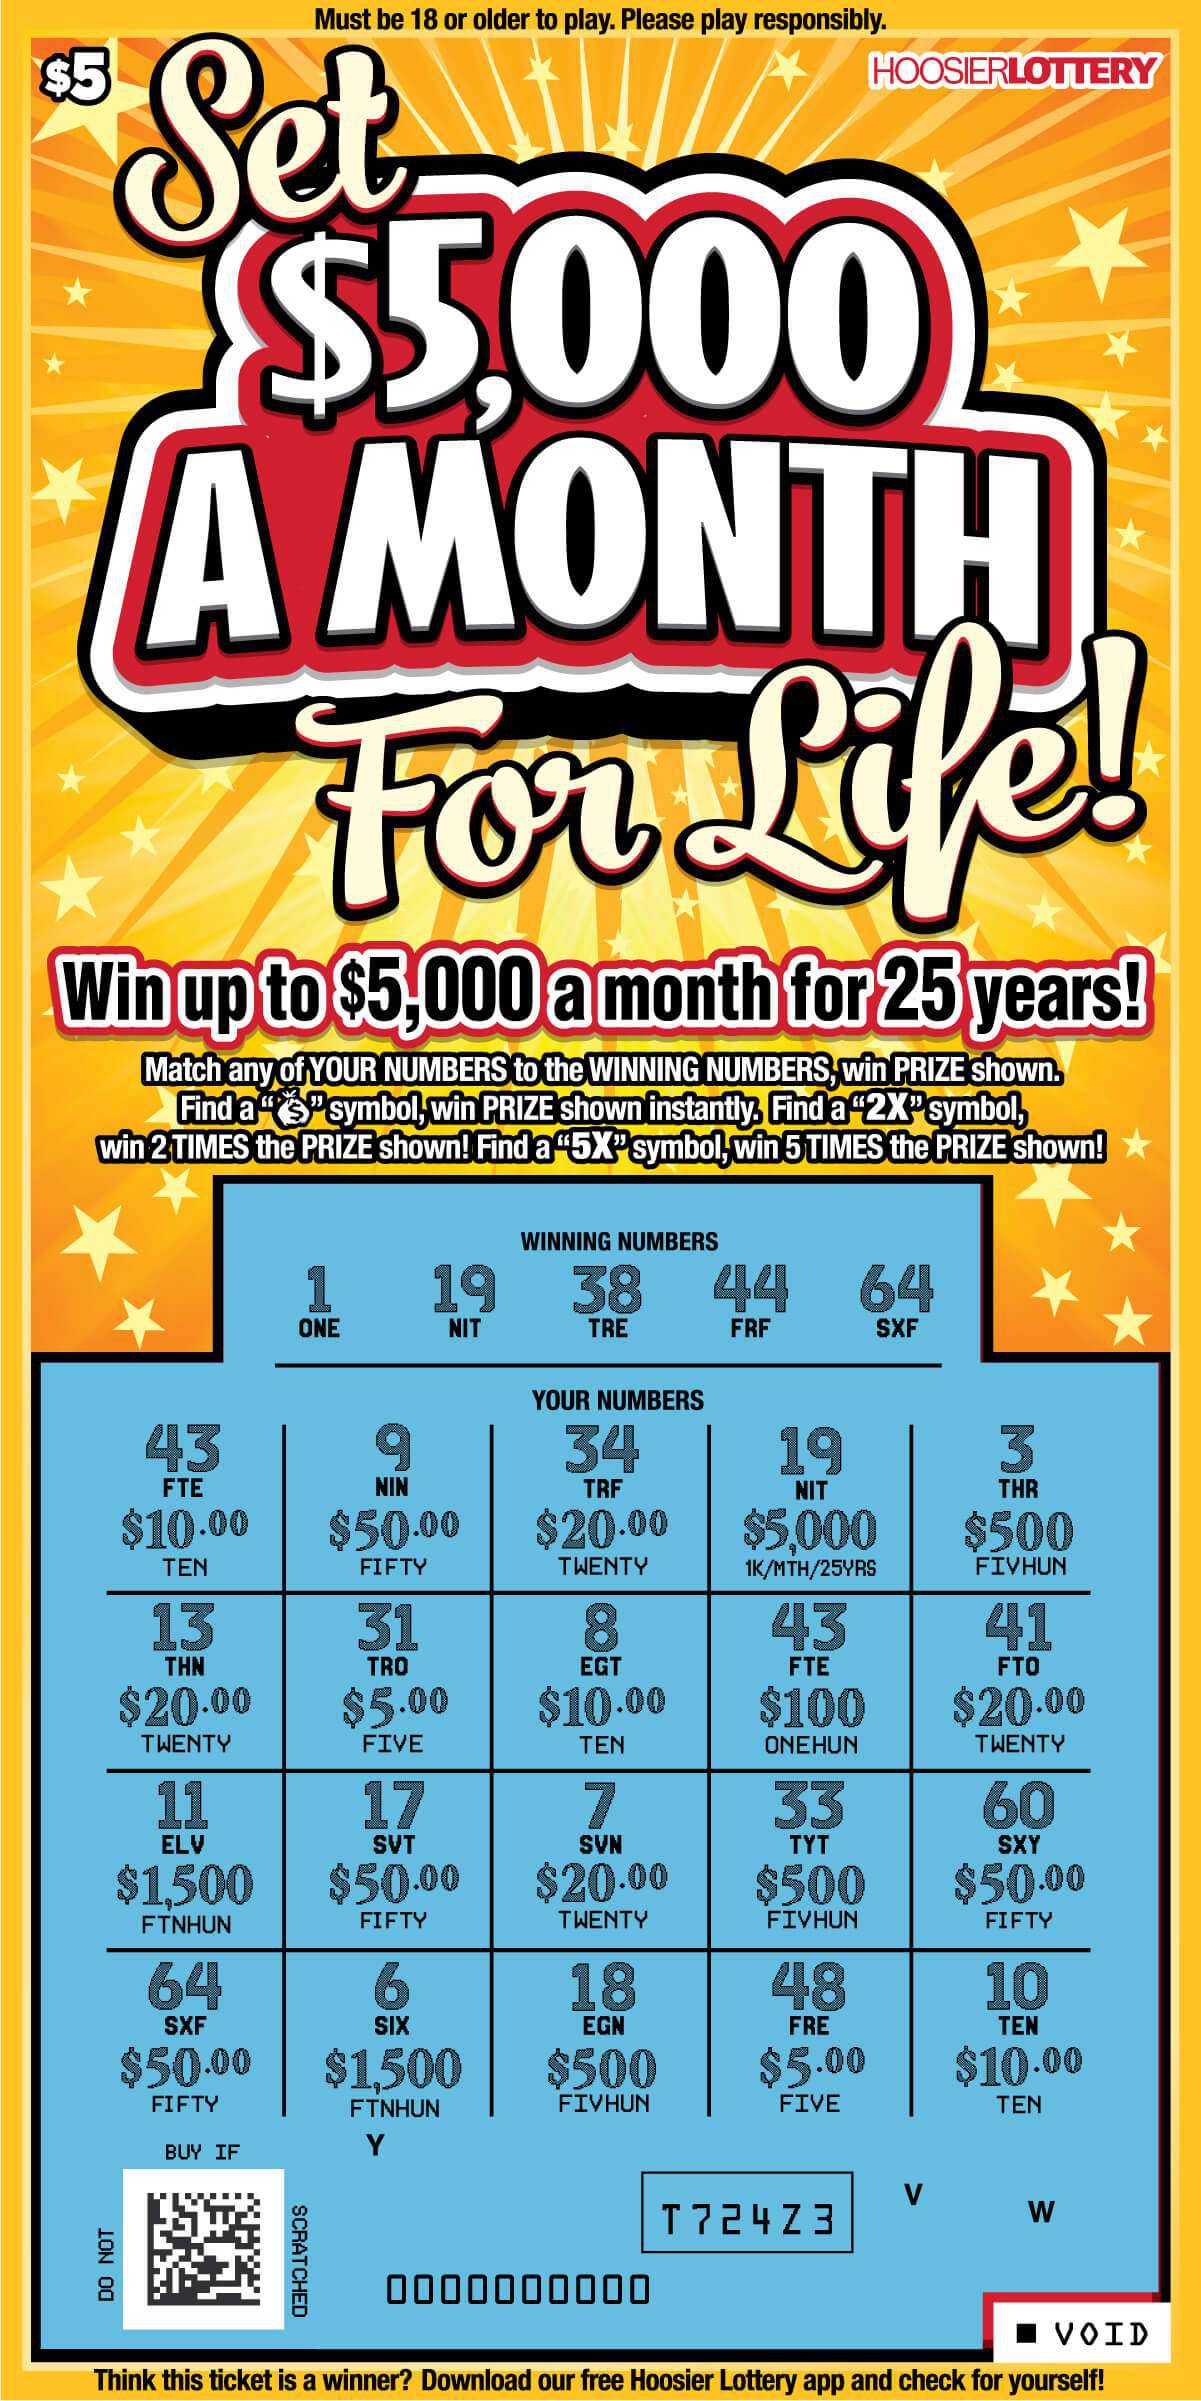 cash for life lotto